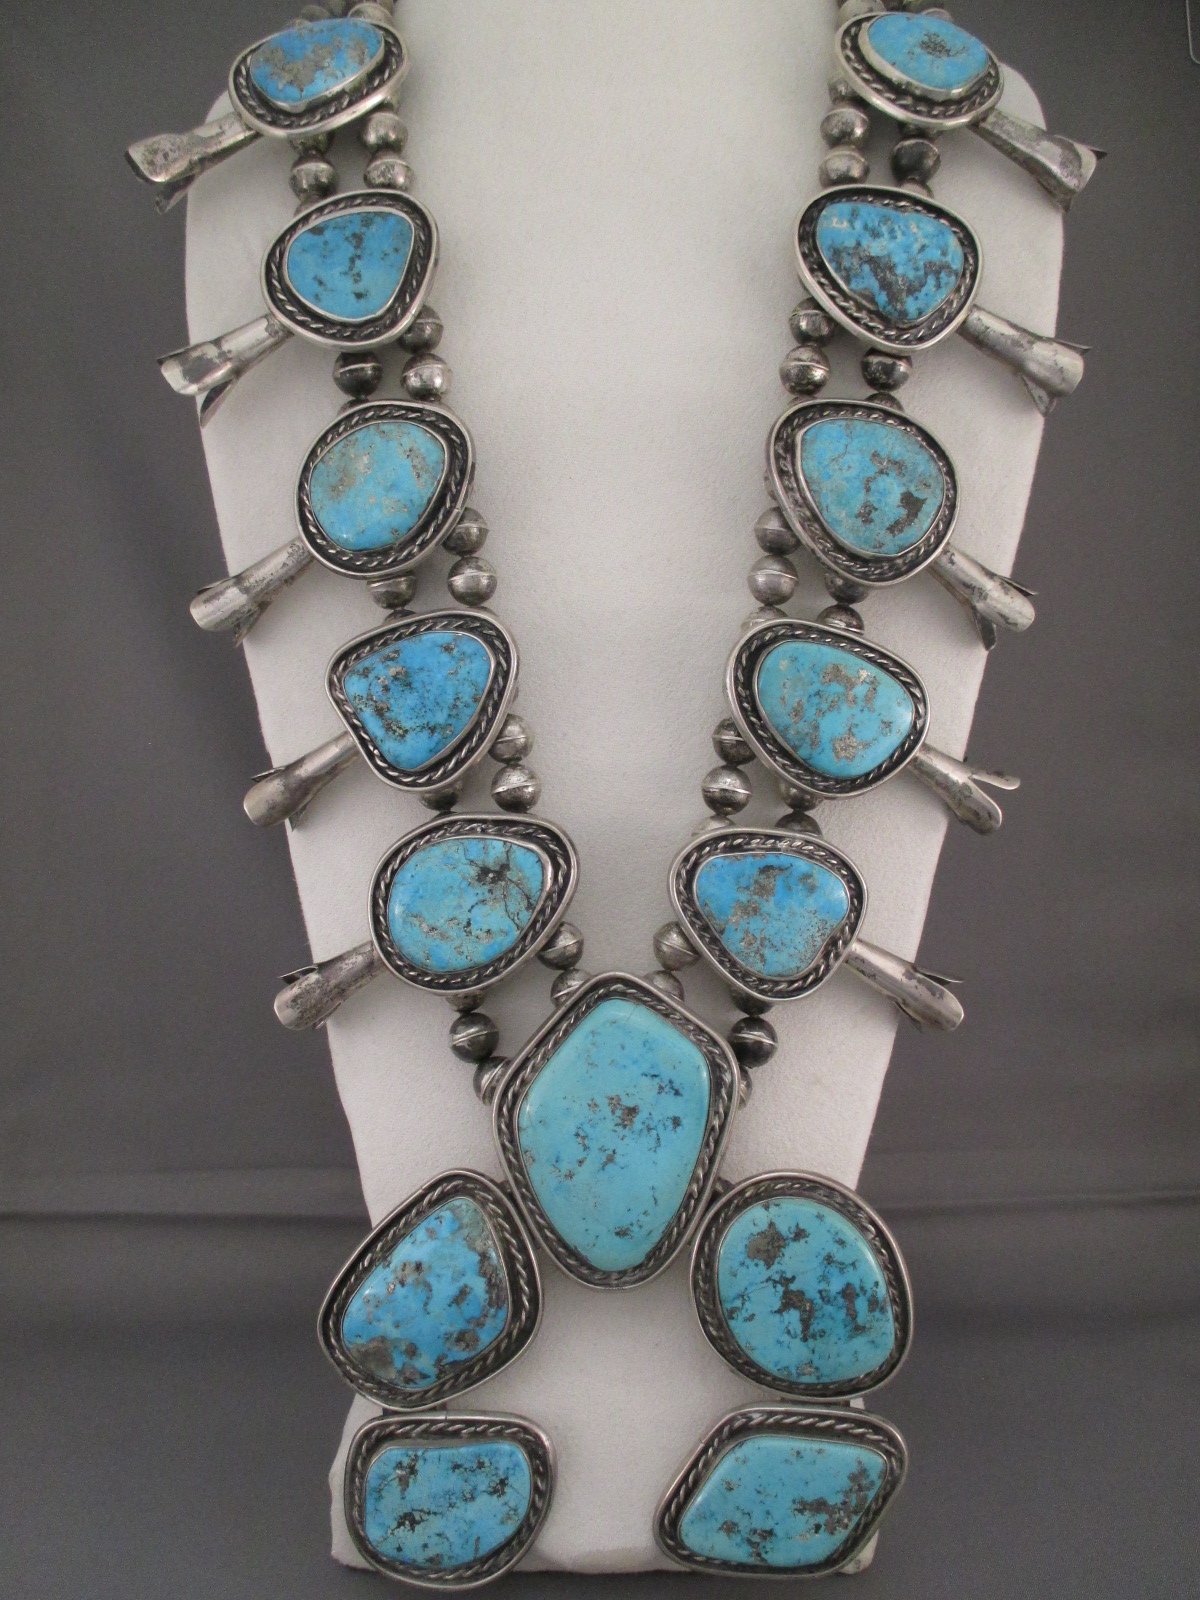 Vintage Authentic Native American Indian Jewelry Navajo Sterling Silver Morenci Turquoise Pendant Native America Southwestern